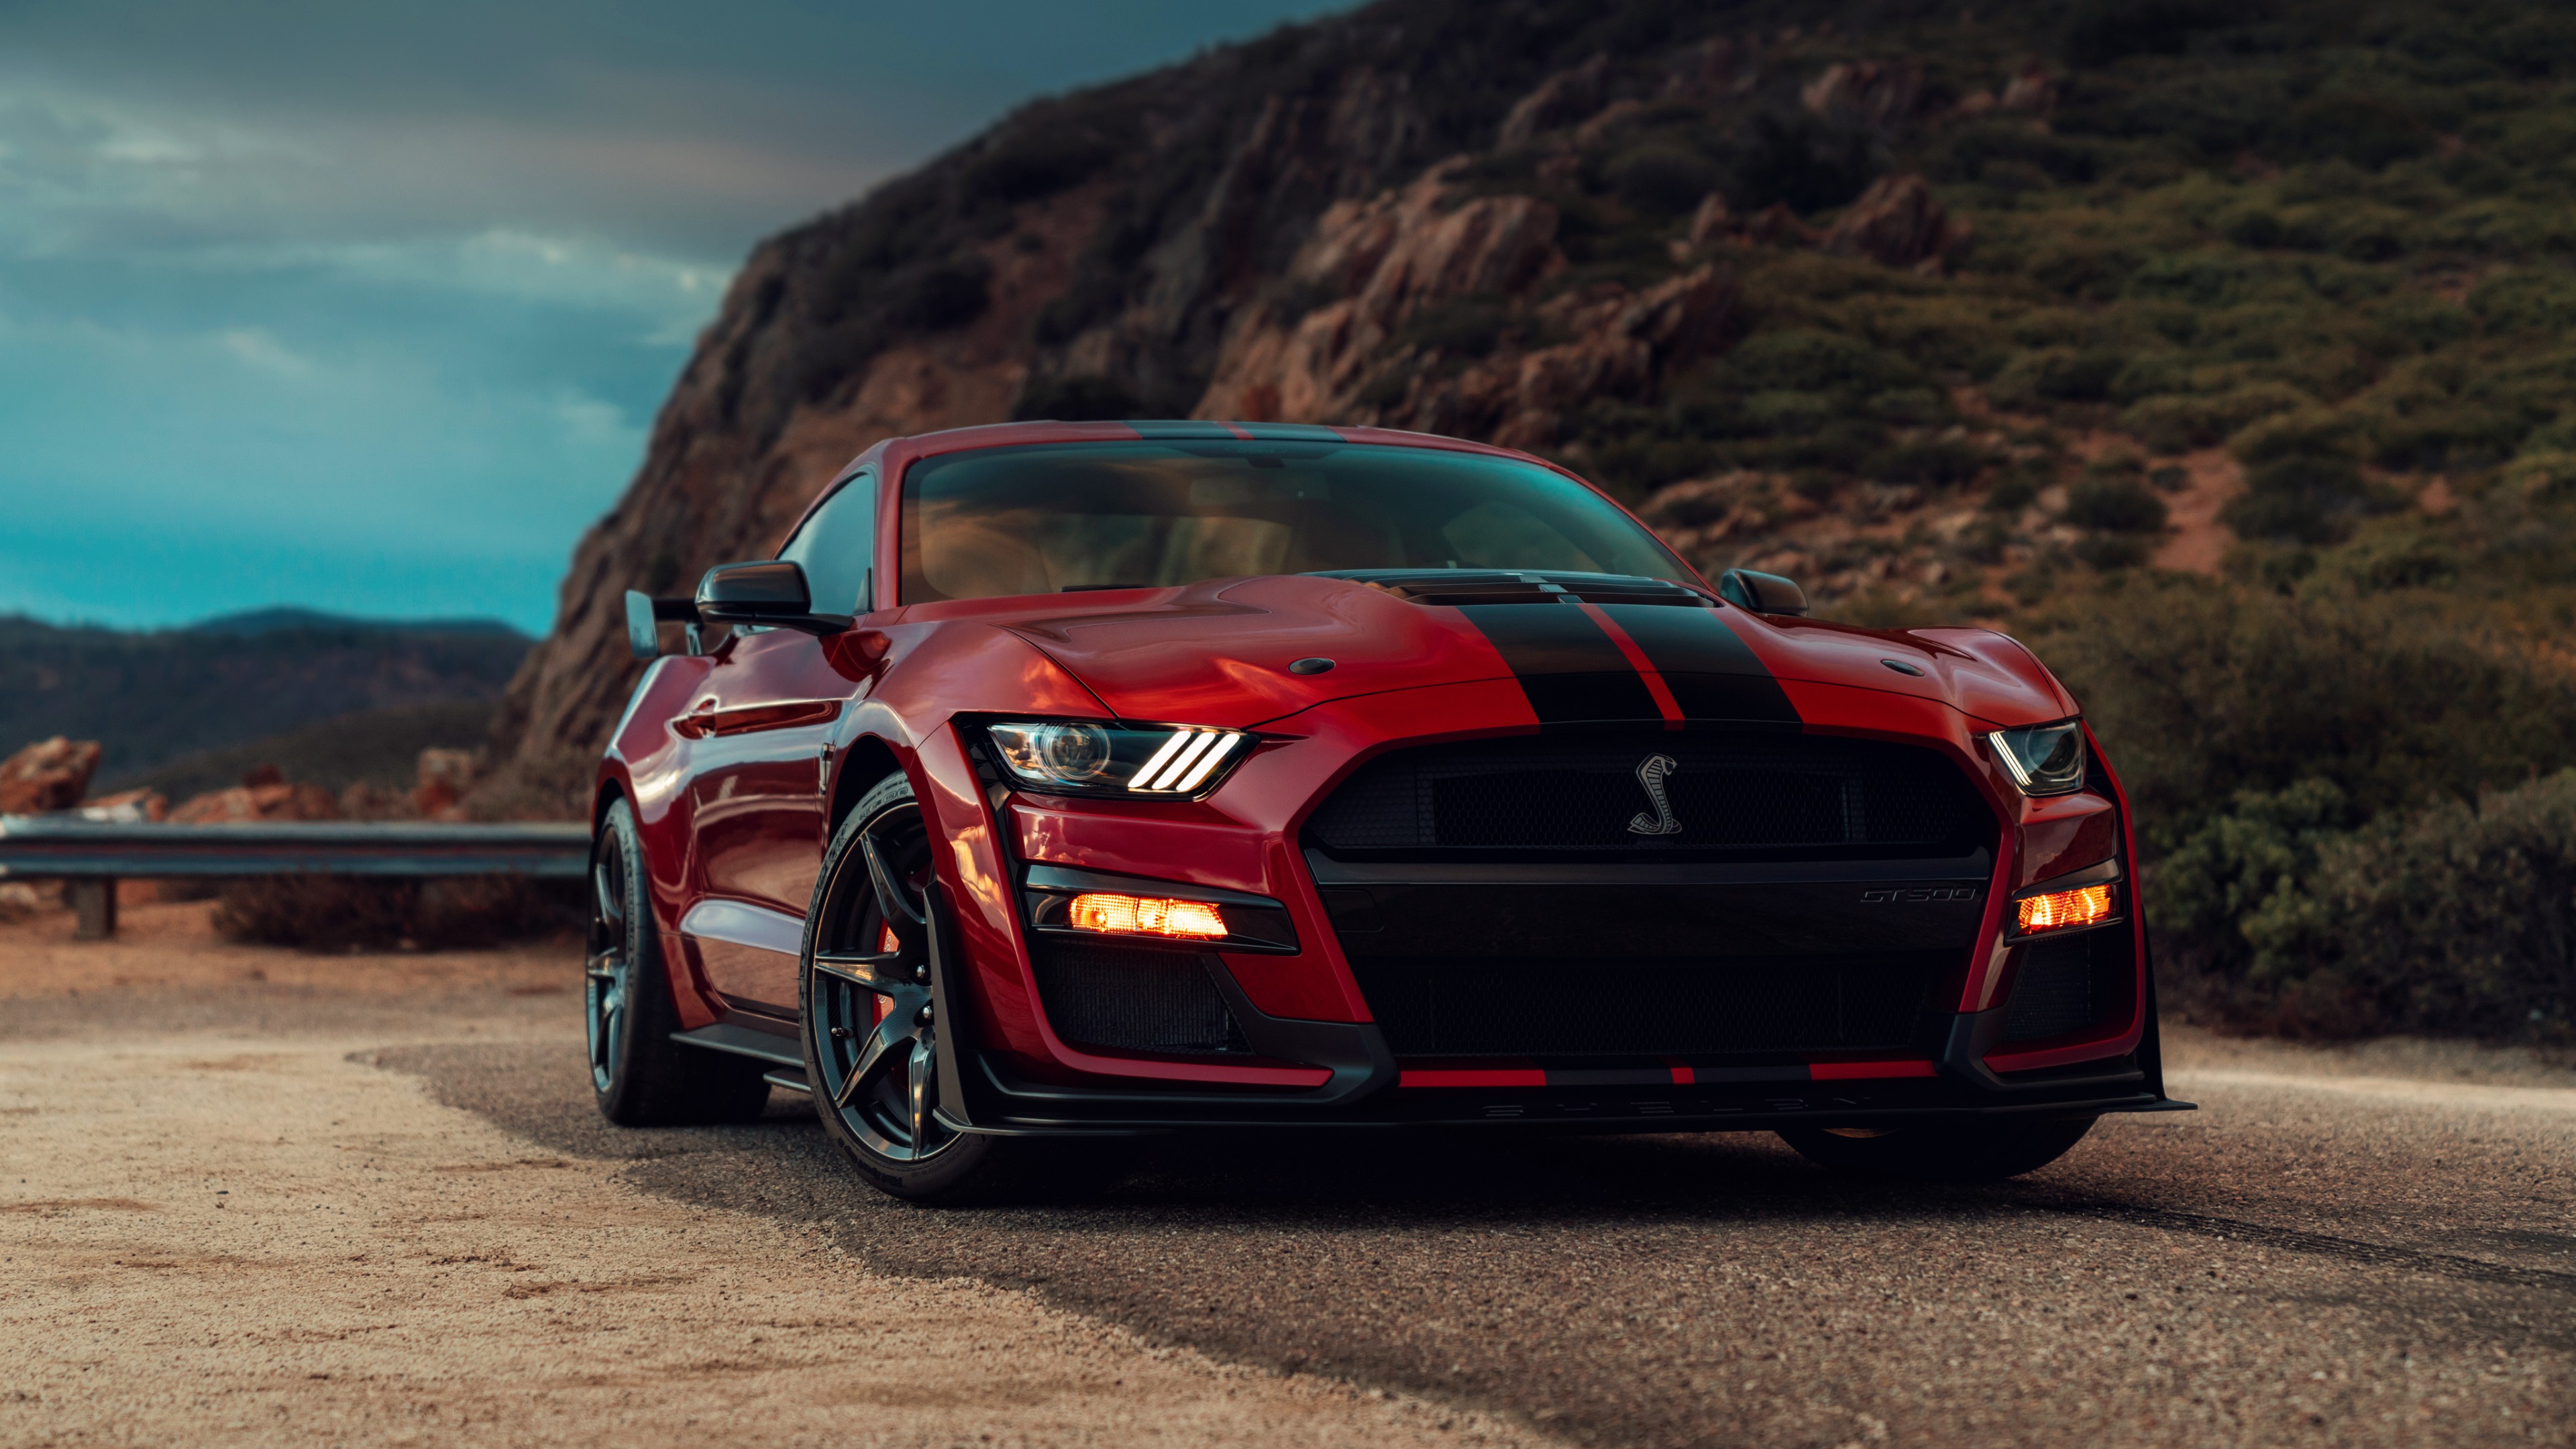 Wallpaper Ford Mustang Shelby GT500, 2020 Cars, 2019 Detroit Auto Show, 4K,  Cars & Bikes #21064